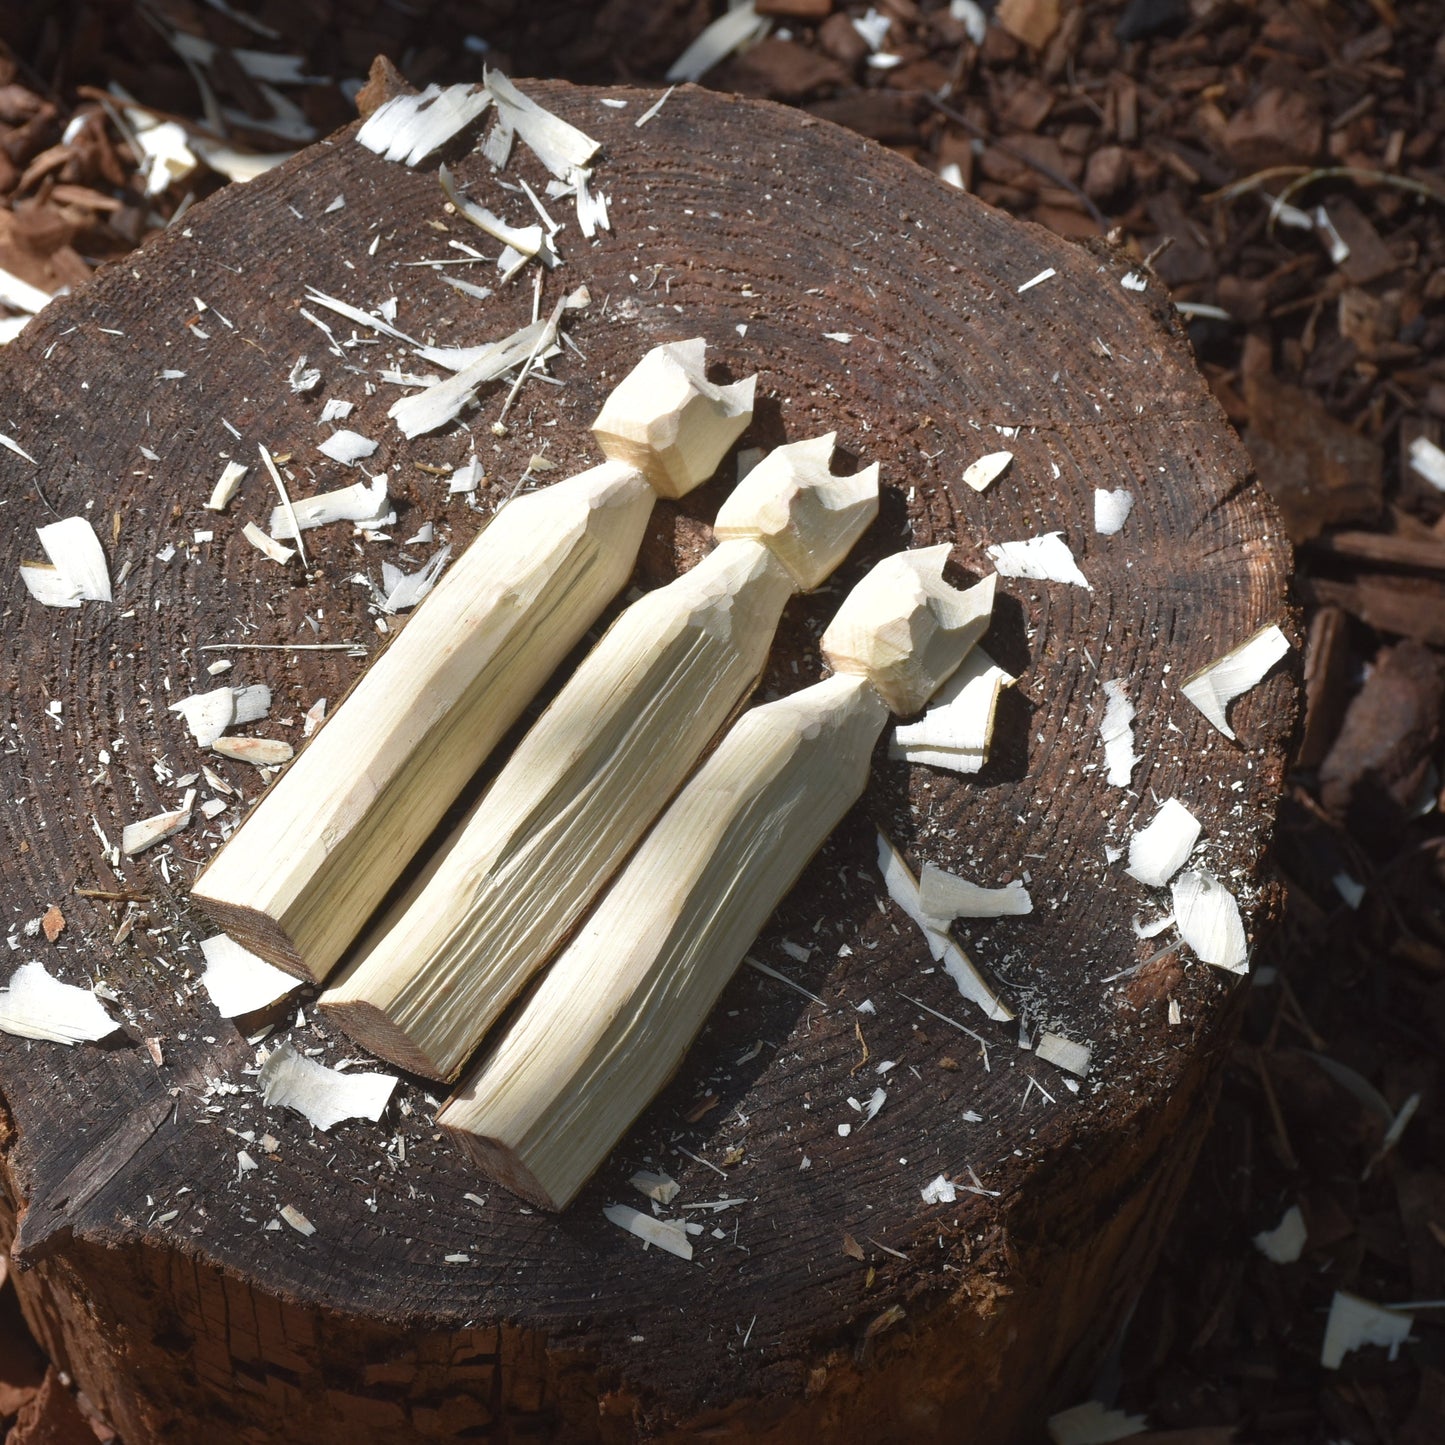 Whittling Wands Wizards & Totems Workshop - 14.07.24 (AM)